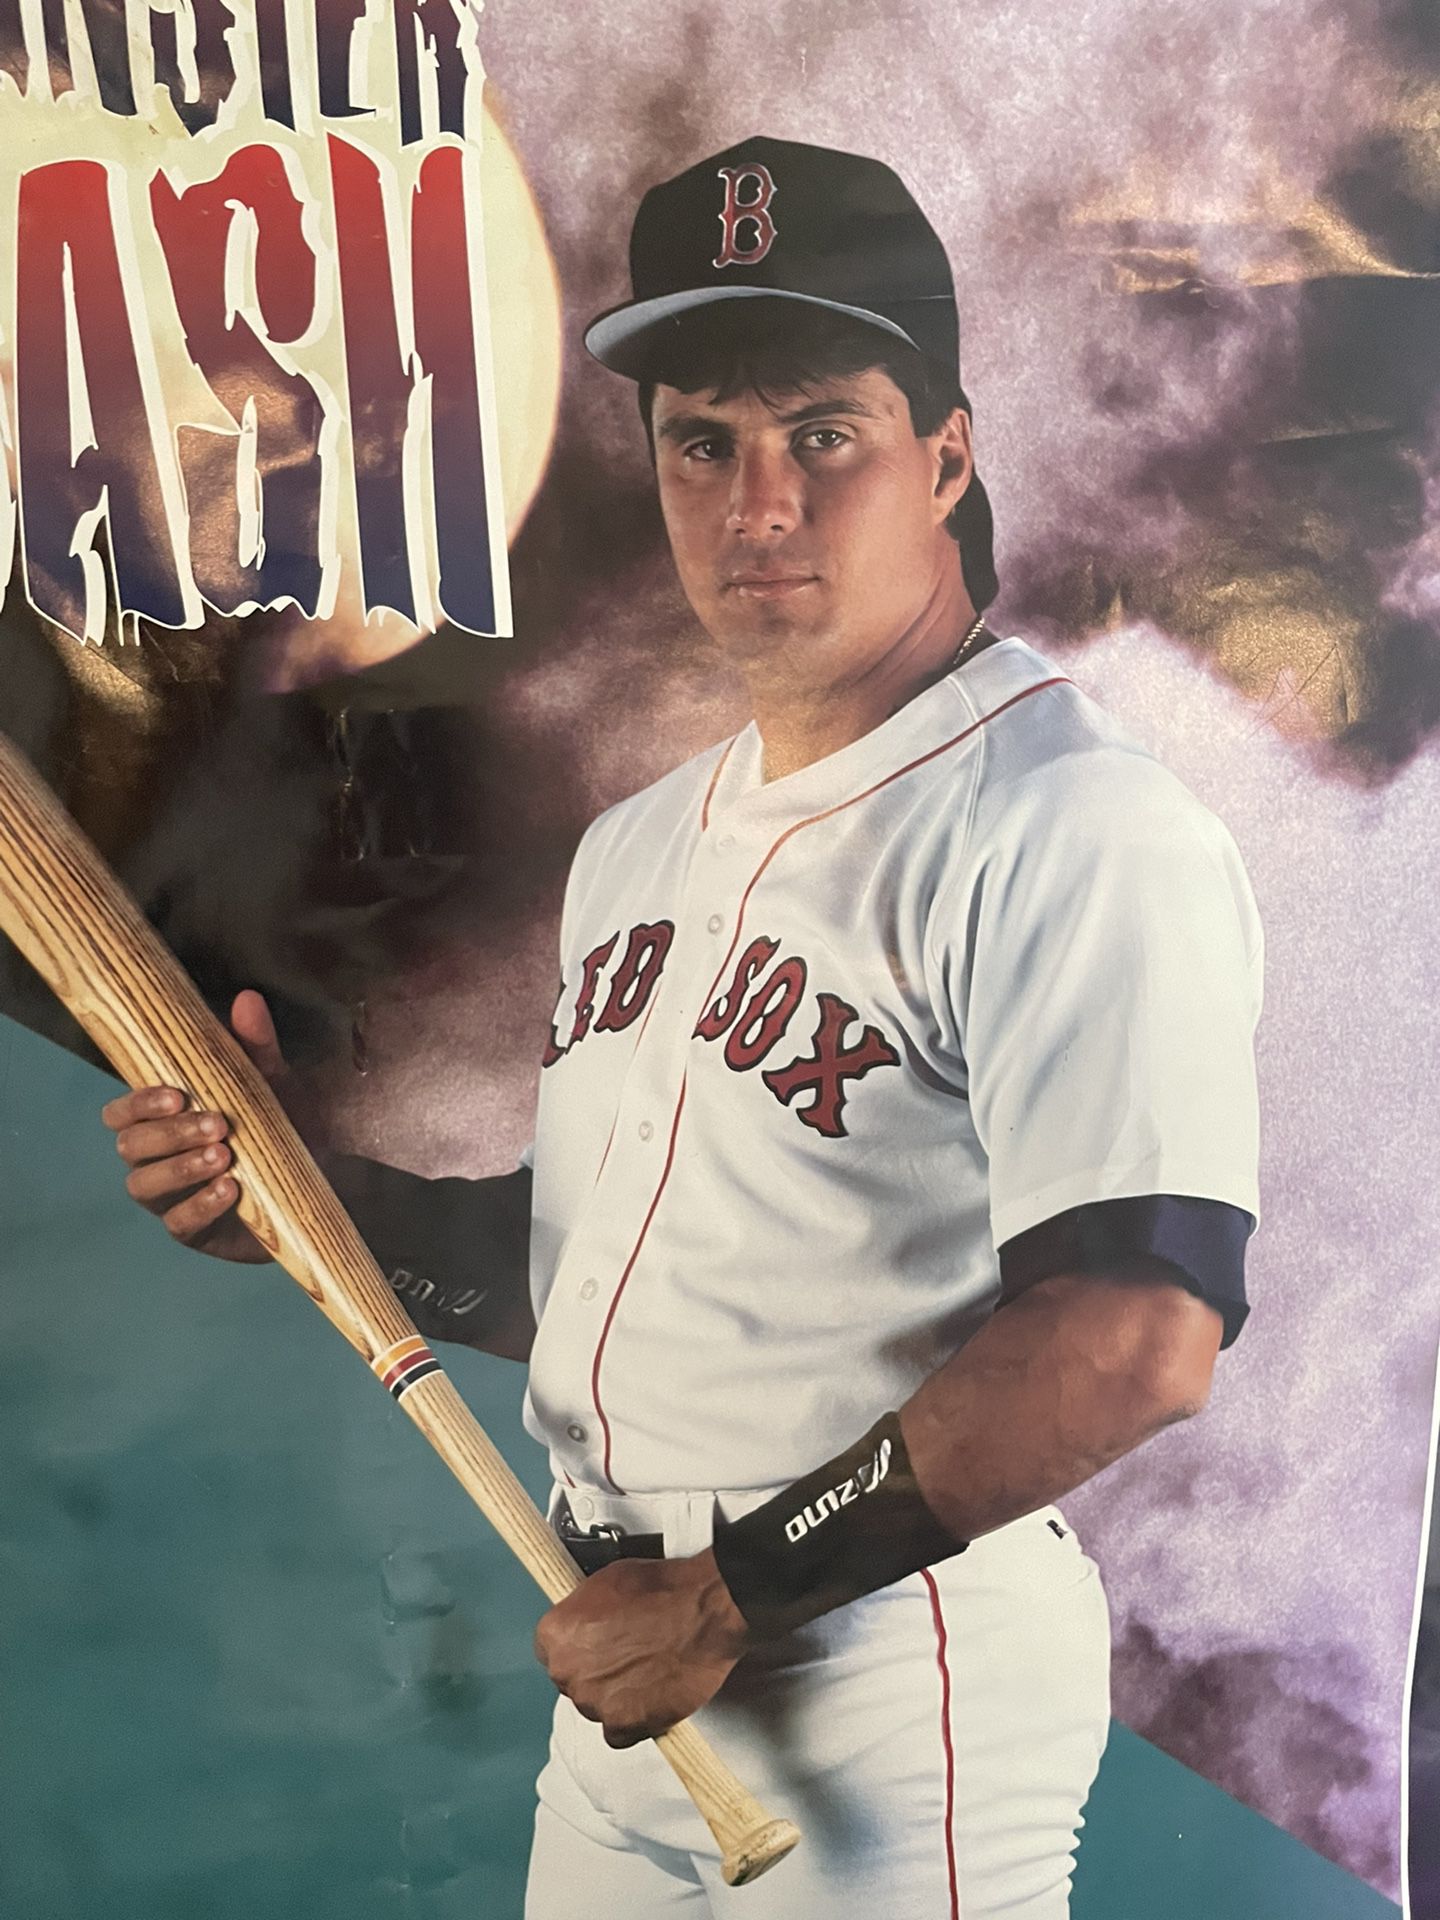 Jose Canseco Boston Red Sox  Jose canseco, Baseball players